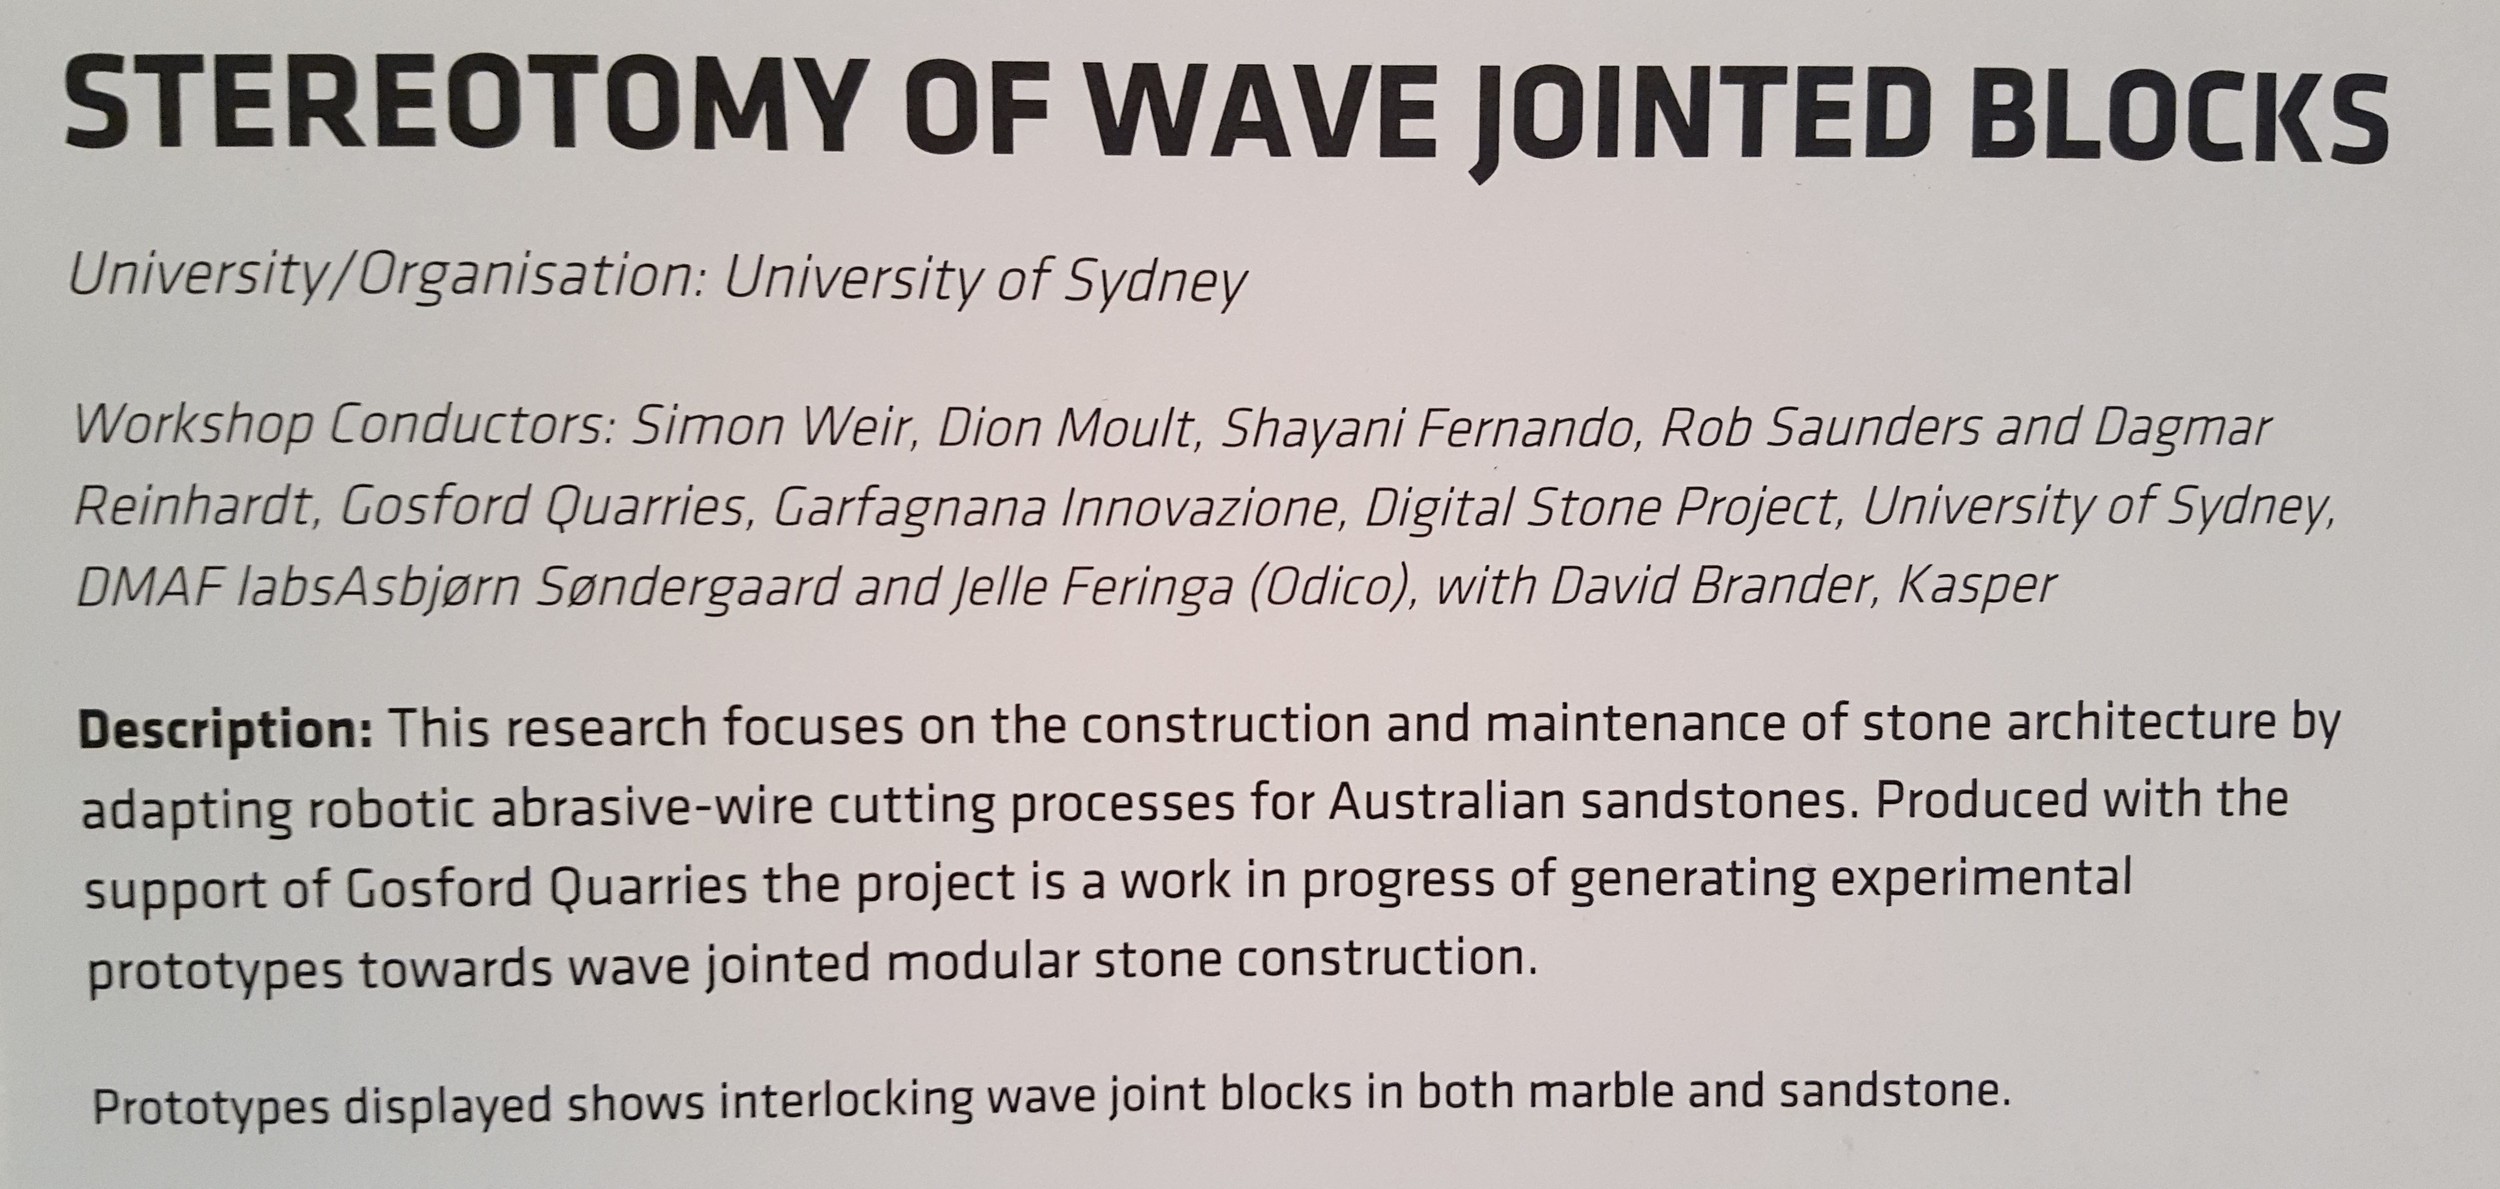  Stereotomy: The collaboration between Gosford Quarries and University Of Sydney. 